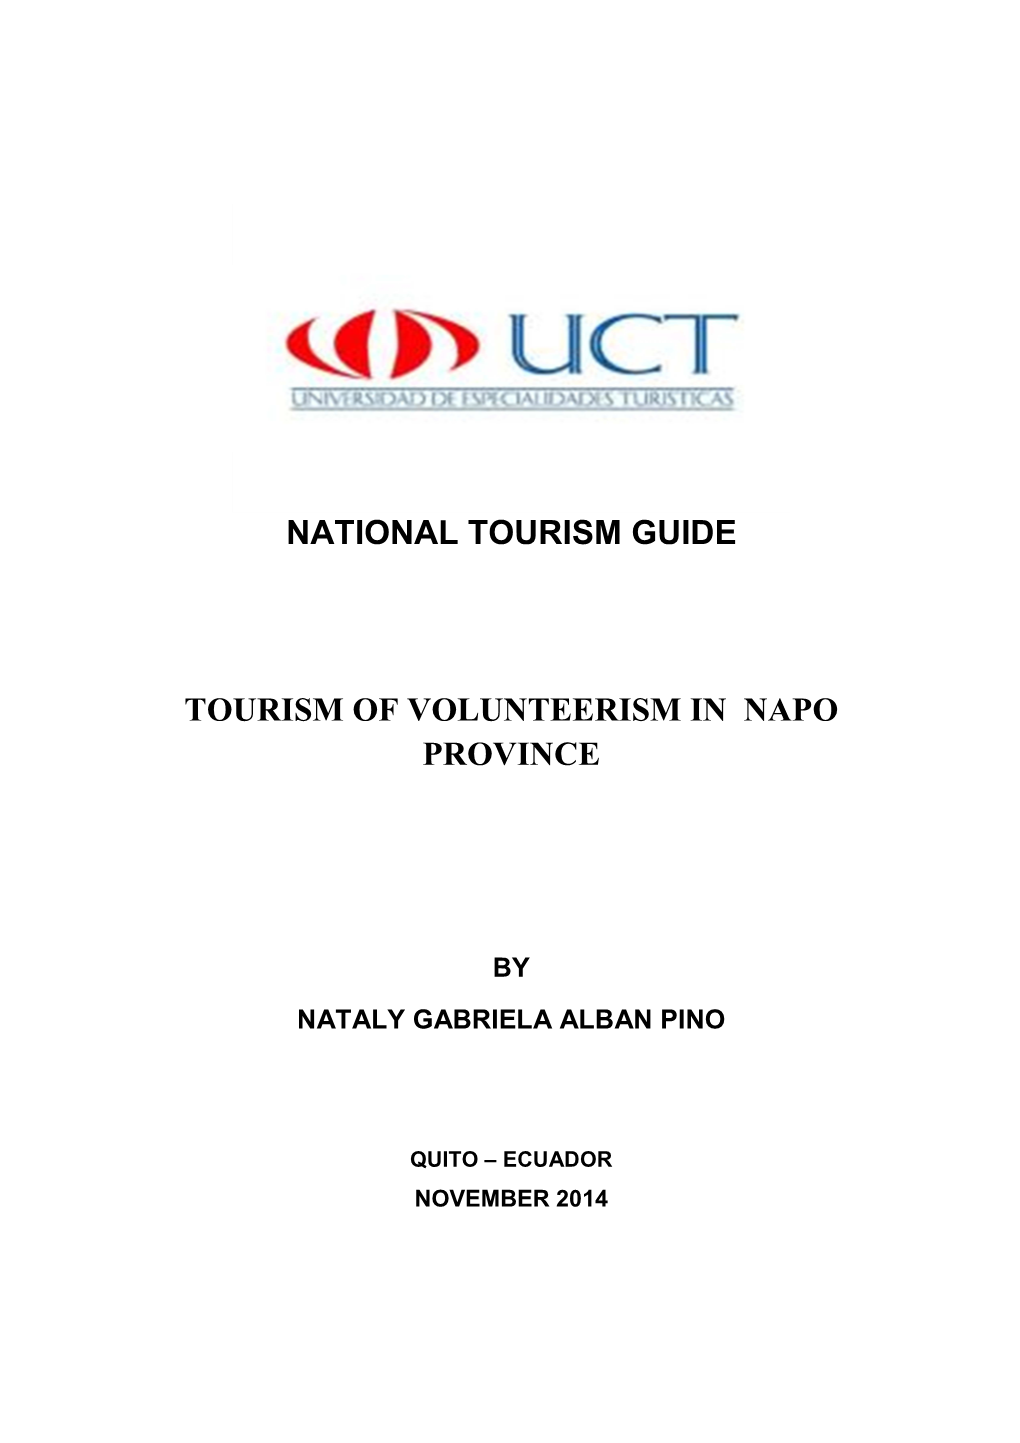 Volunteer Tourism in Napo Province